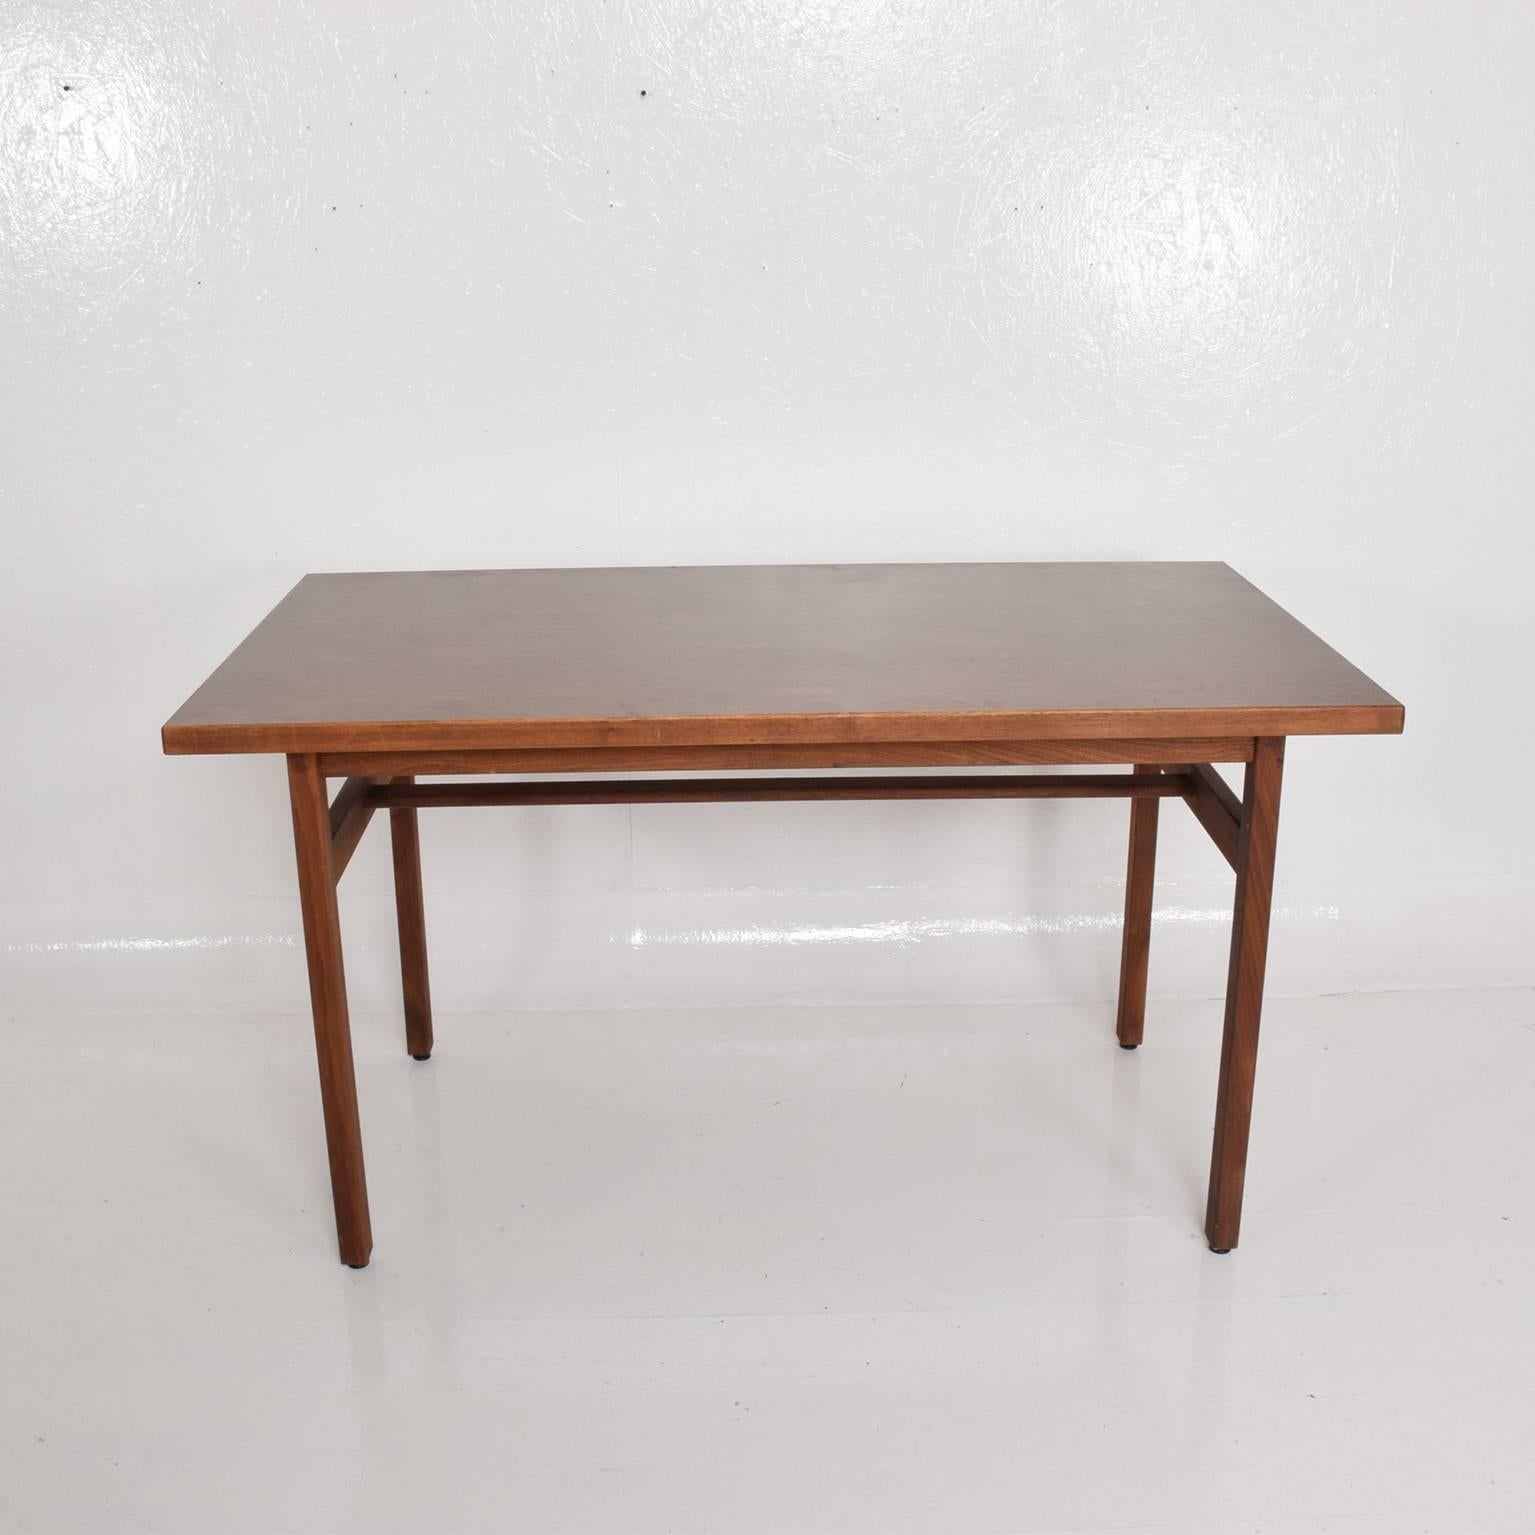 For your consideration a vintage table/desk by Jens Risom.
Walnut wood with Formica top. 
Orignal label underneath.
Dimensions:
29 3/4